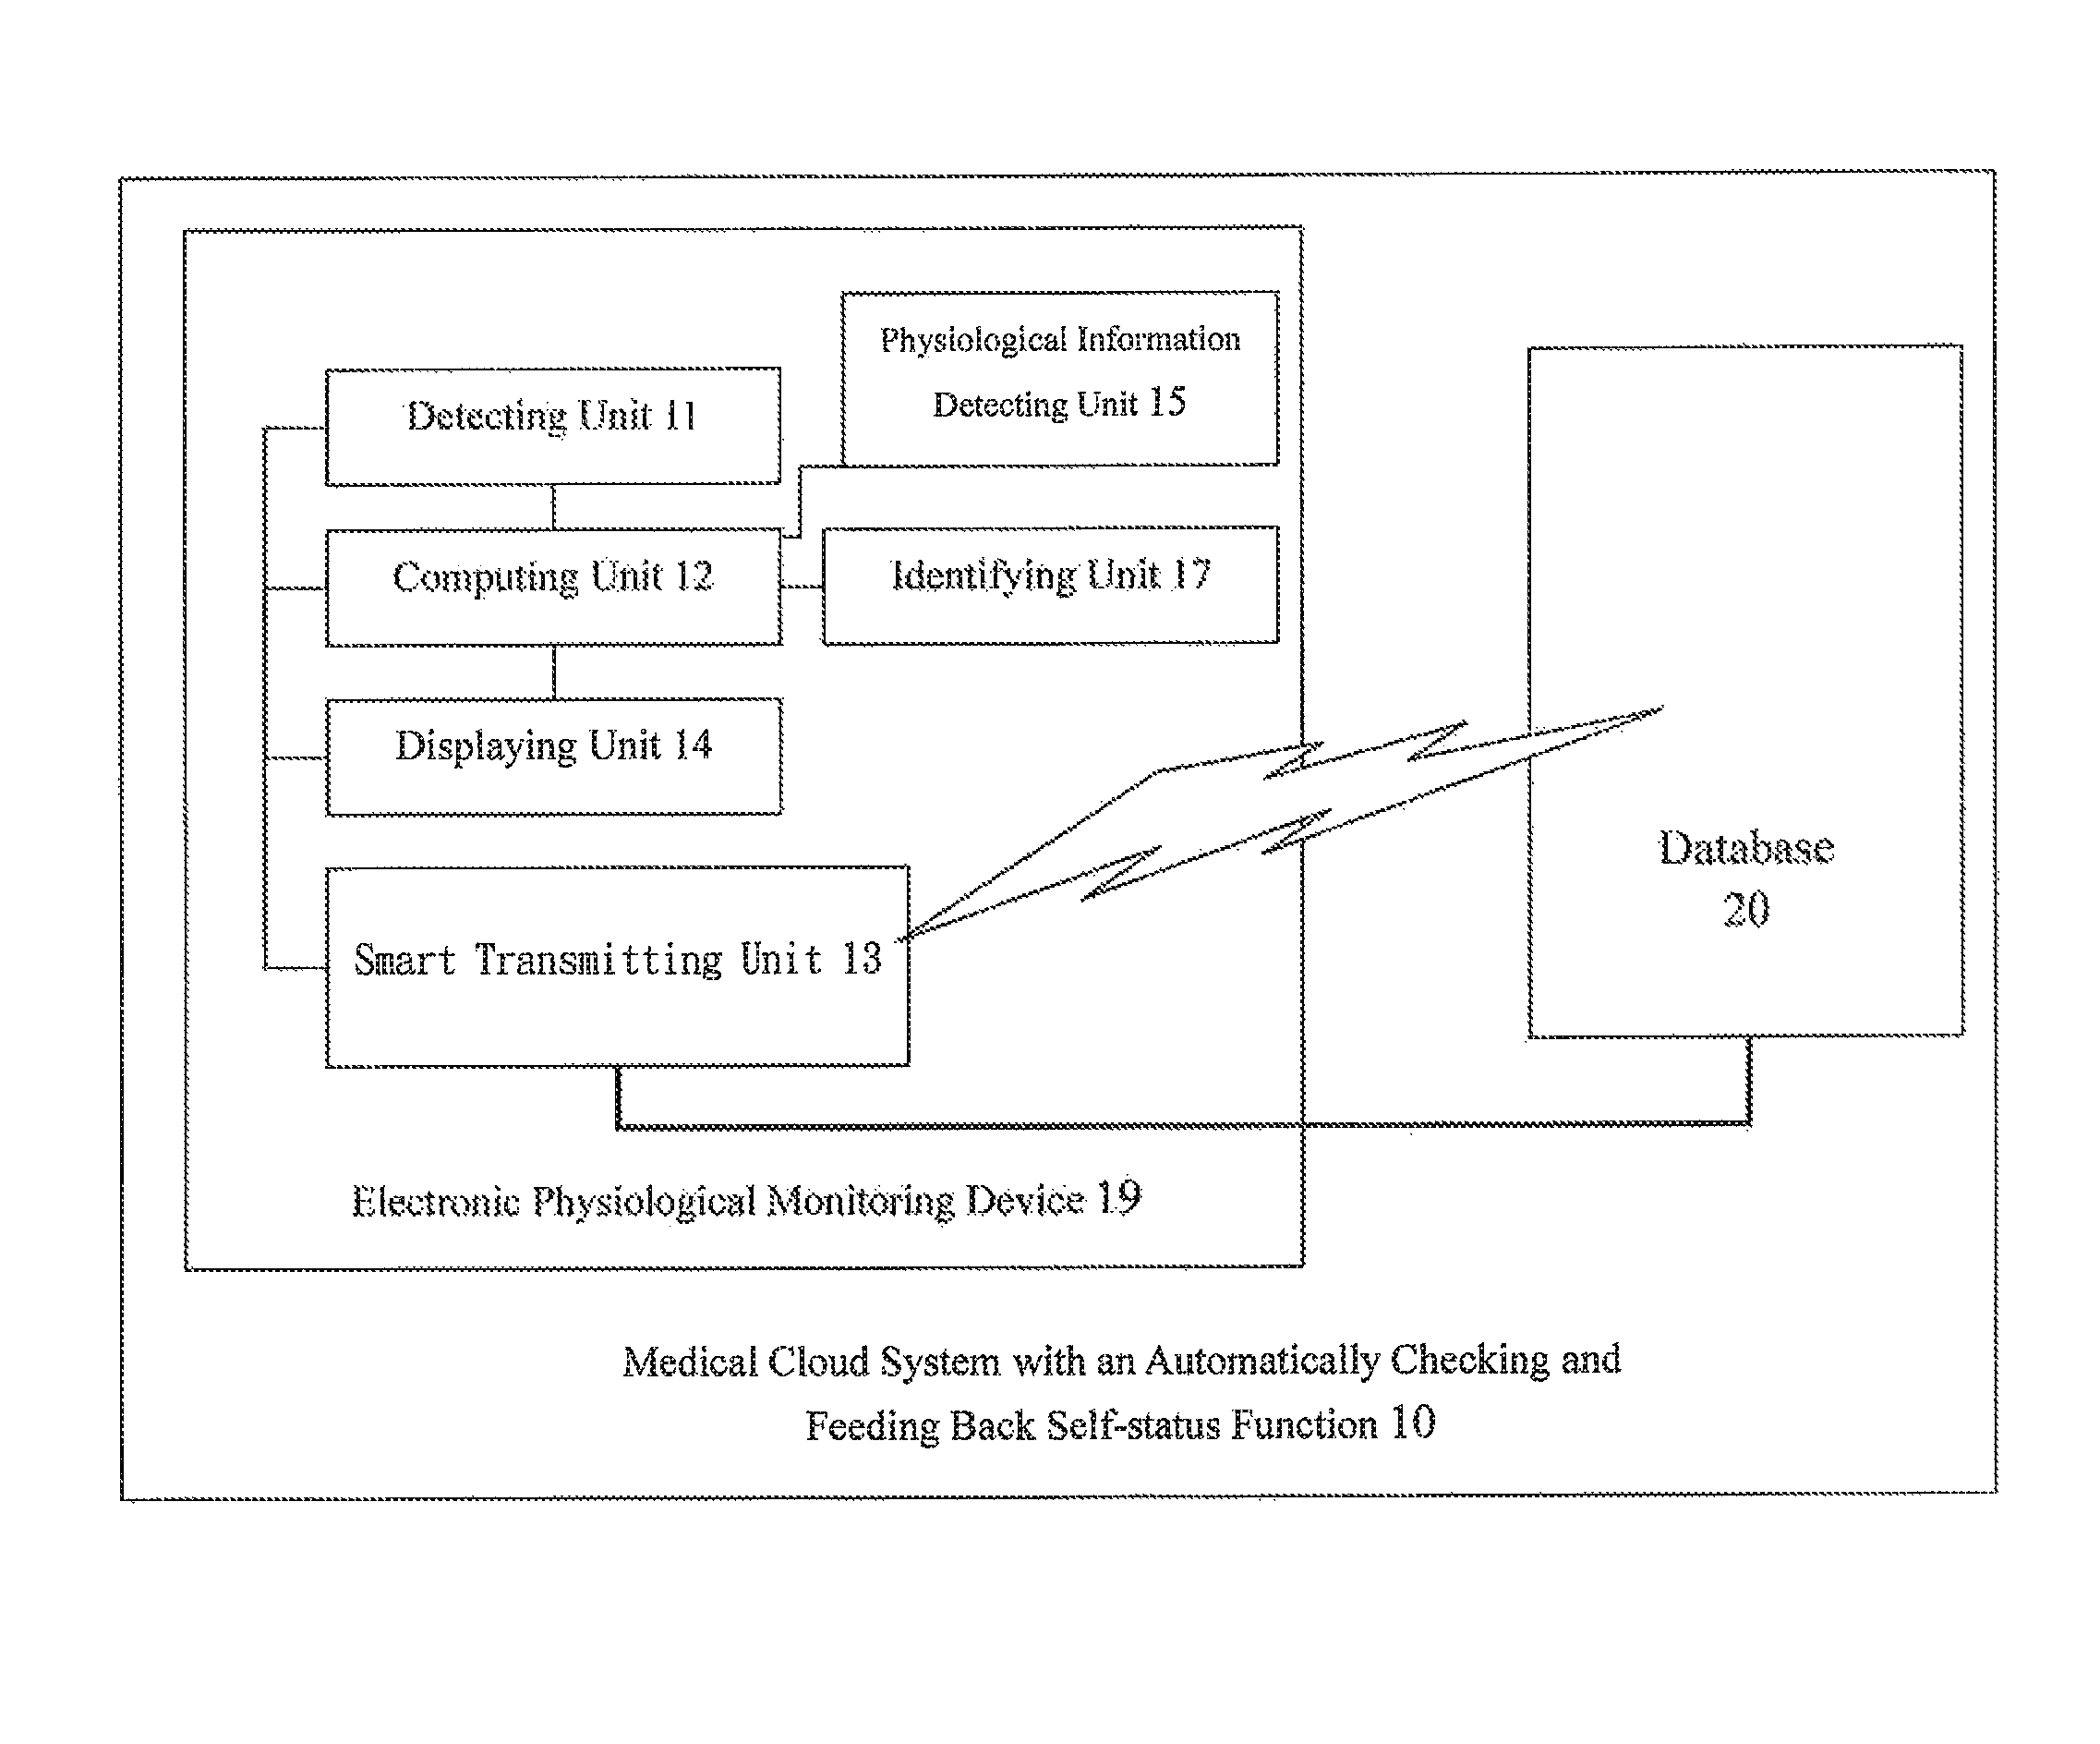 Medical cloud system with an automatically checking and feeding back self-status function